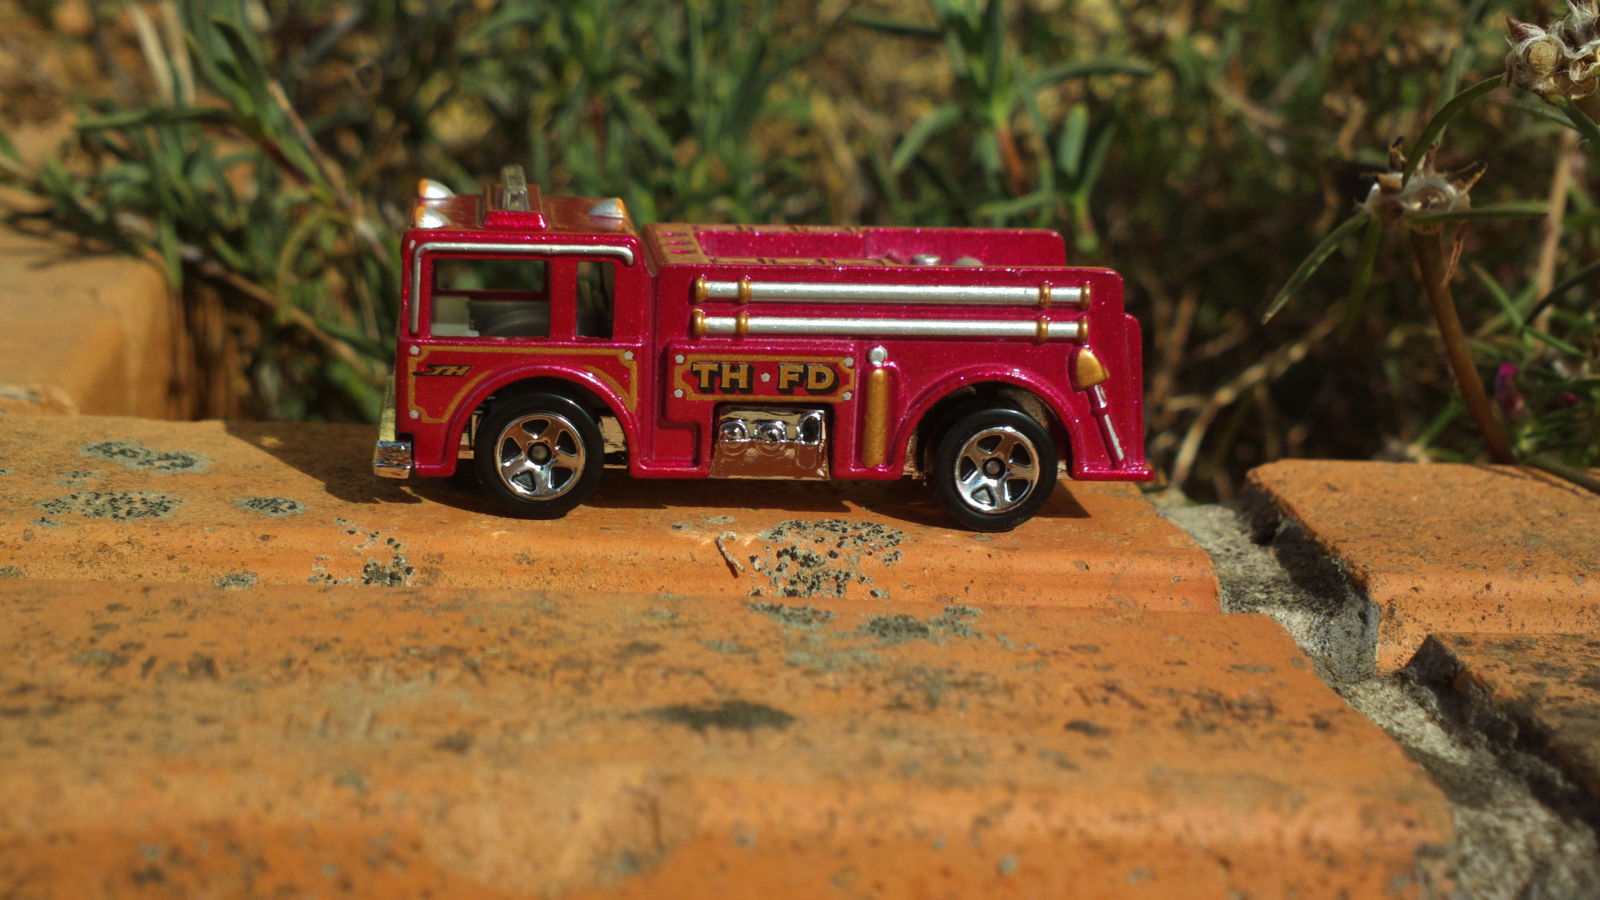 Illustration for article titled Fire Truck Tuesday